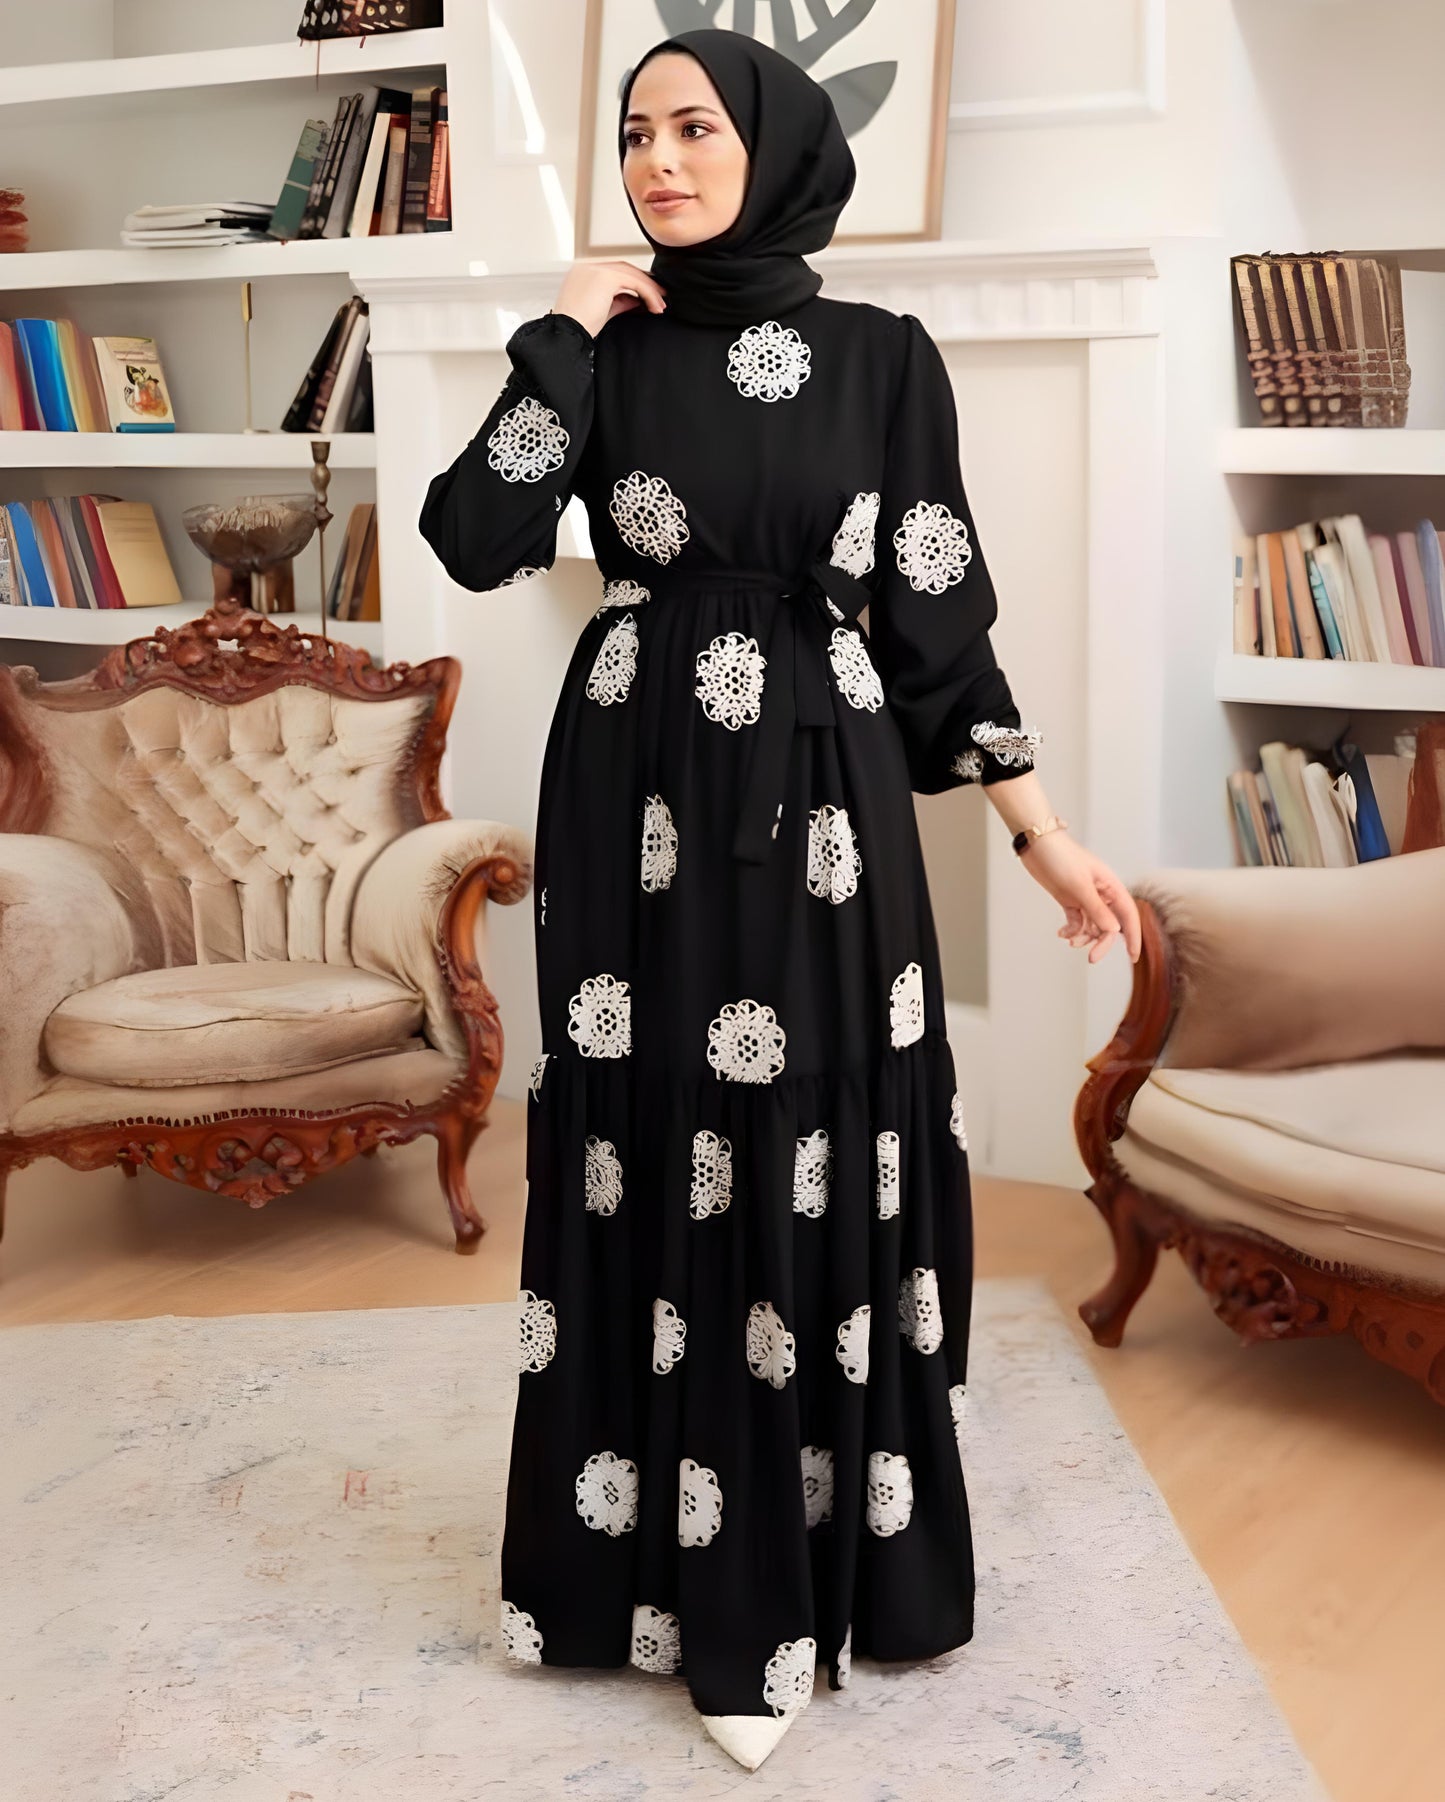 Women's Stylish Turkish Abaya with Floral stitched pattern | Imported material